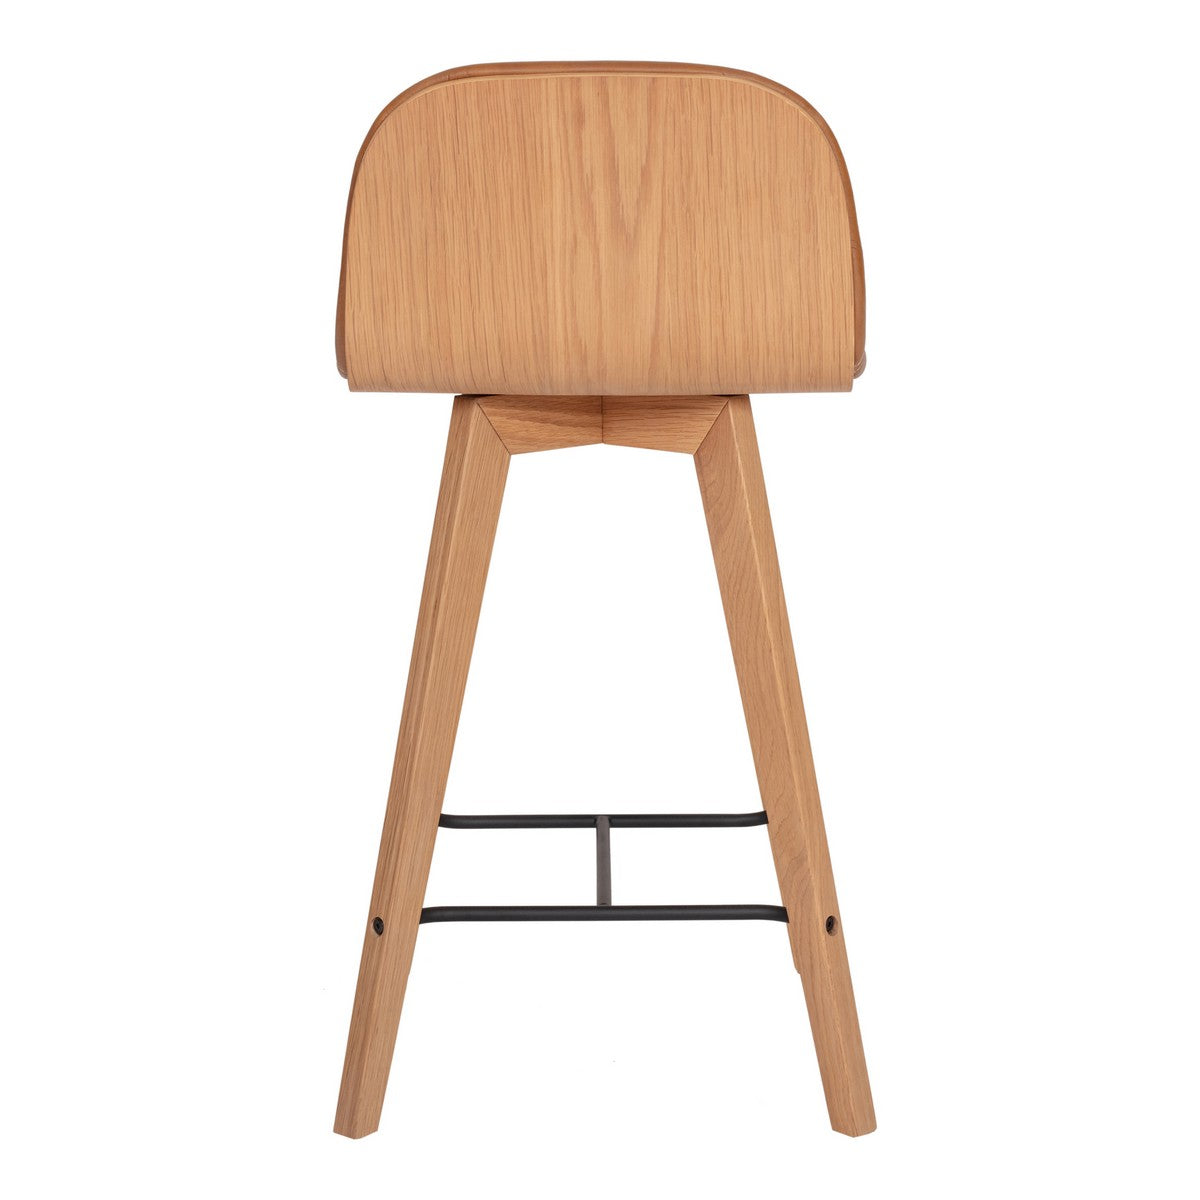 Moe's Home Collection Napoli Leather Counter Stool Tan - YC-1020-40